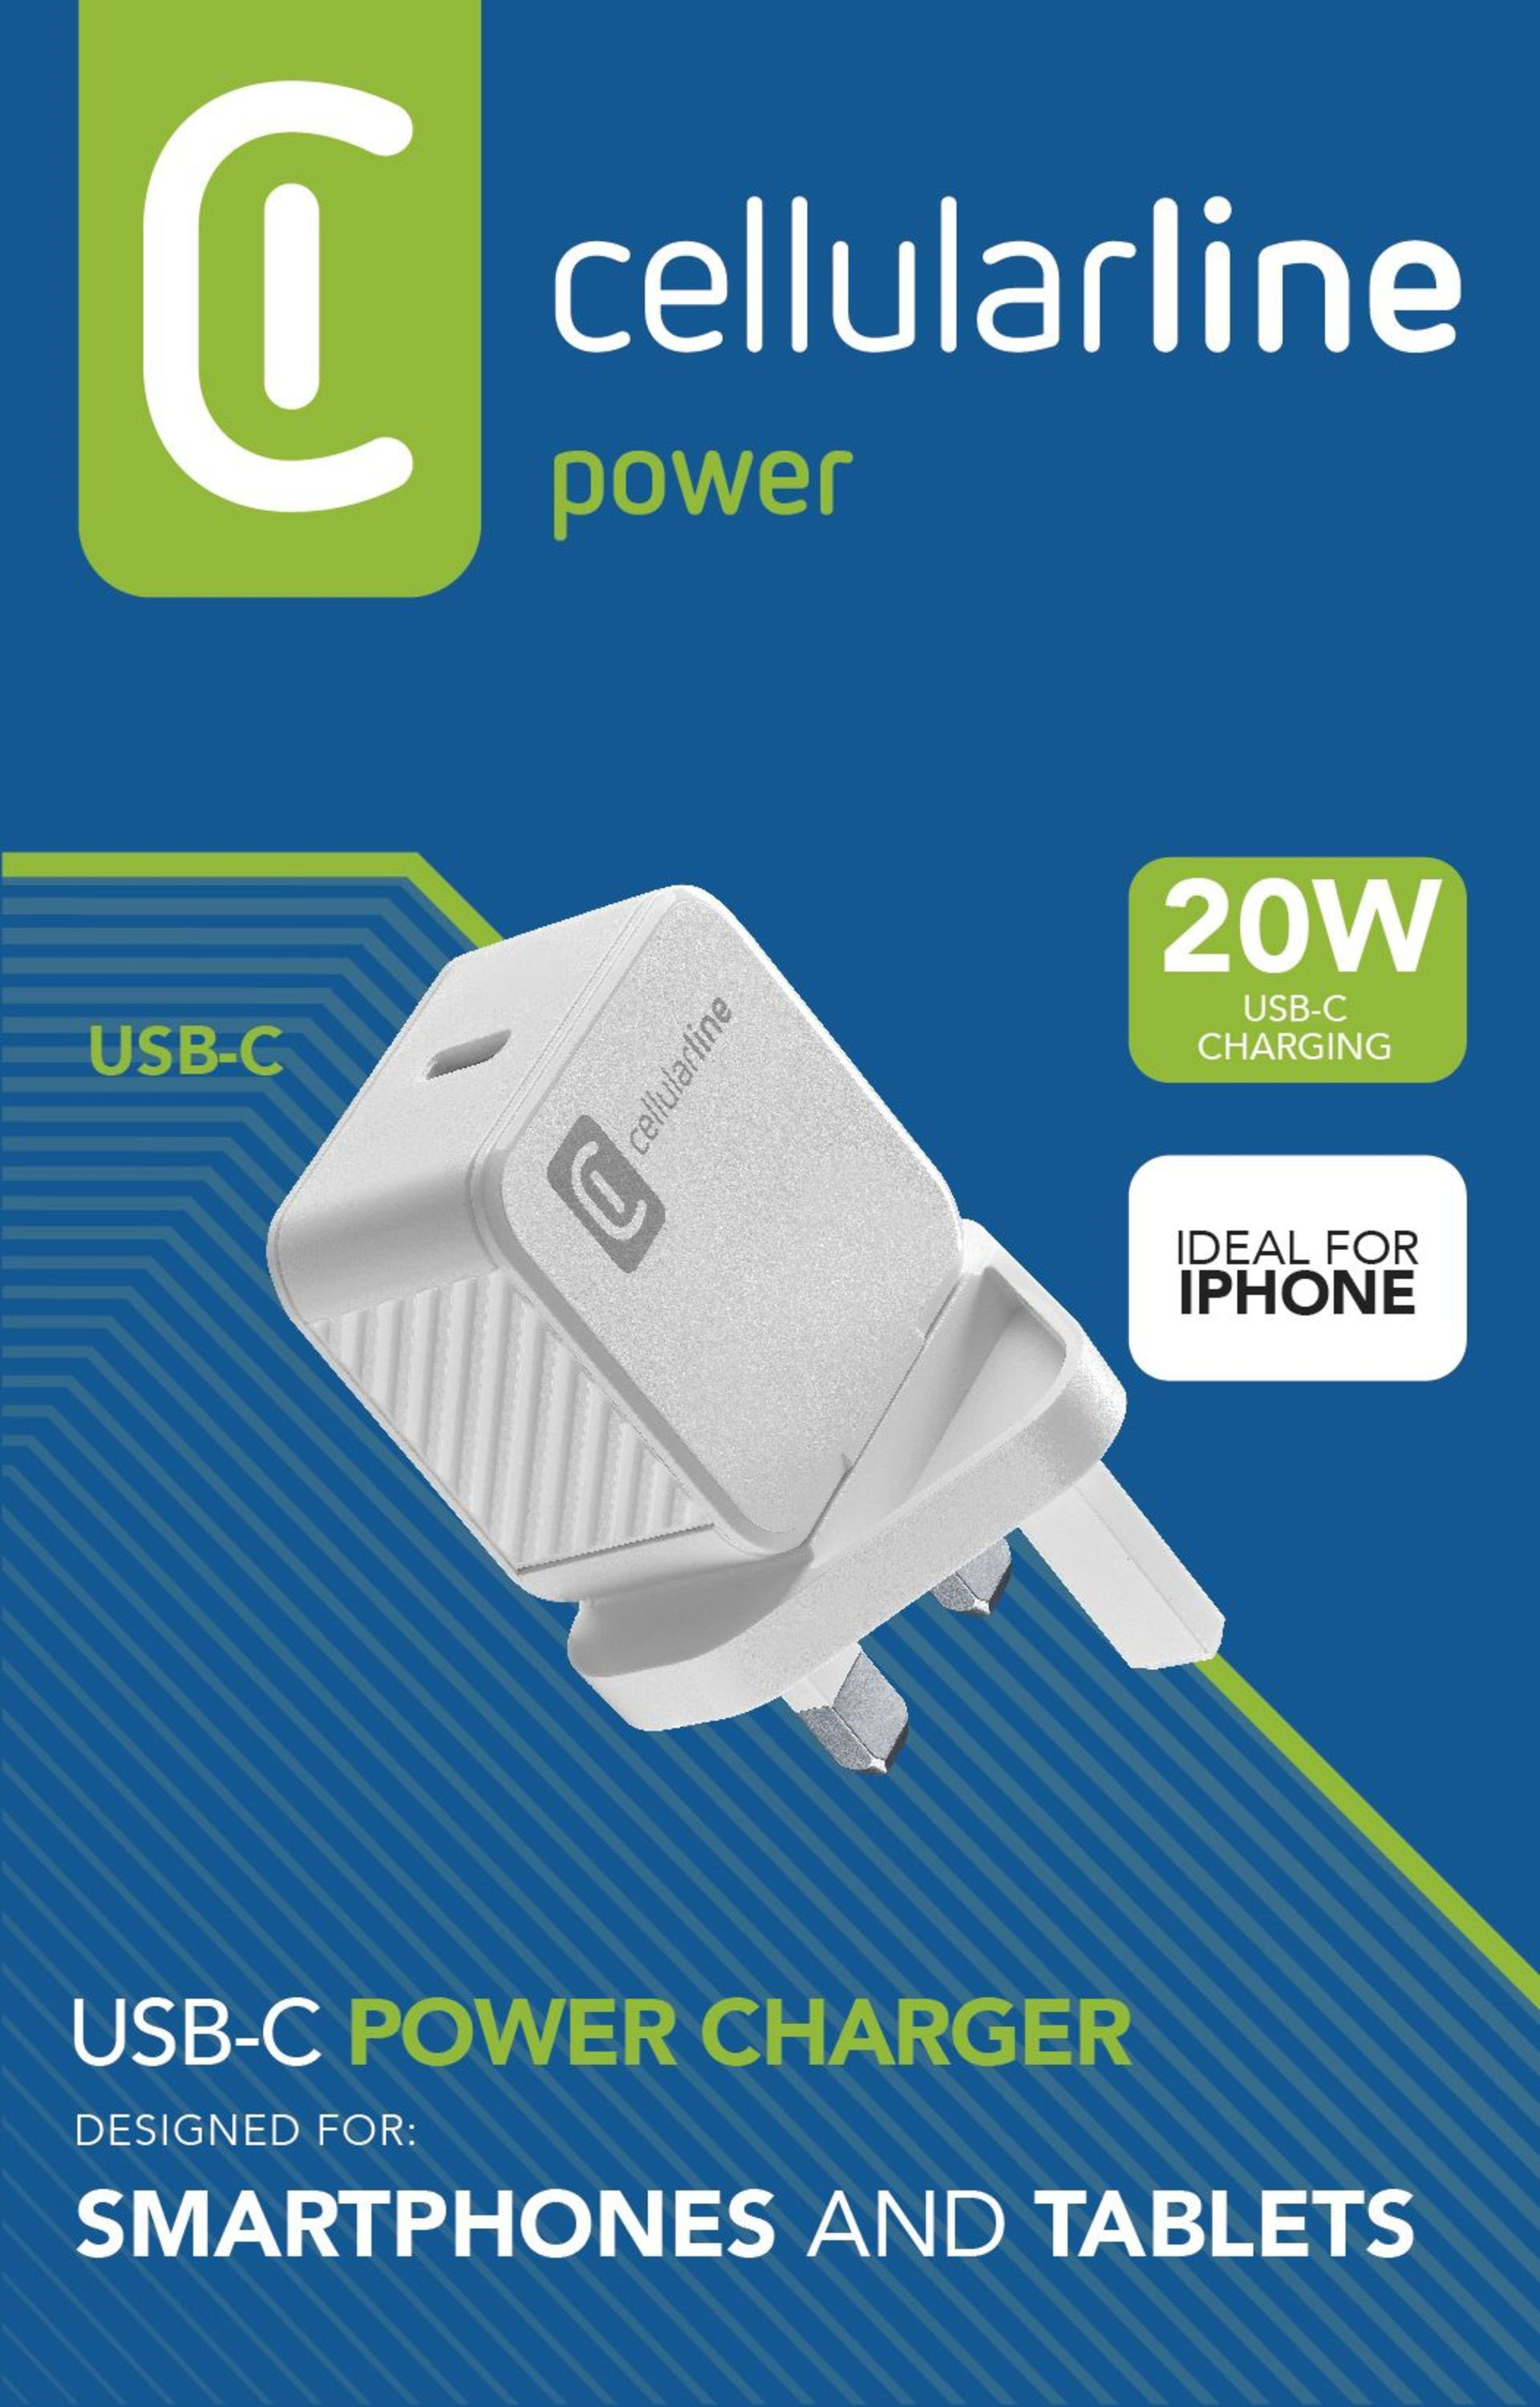 CELLULAR LINE USB-C POWER CHARGER 20W 